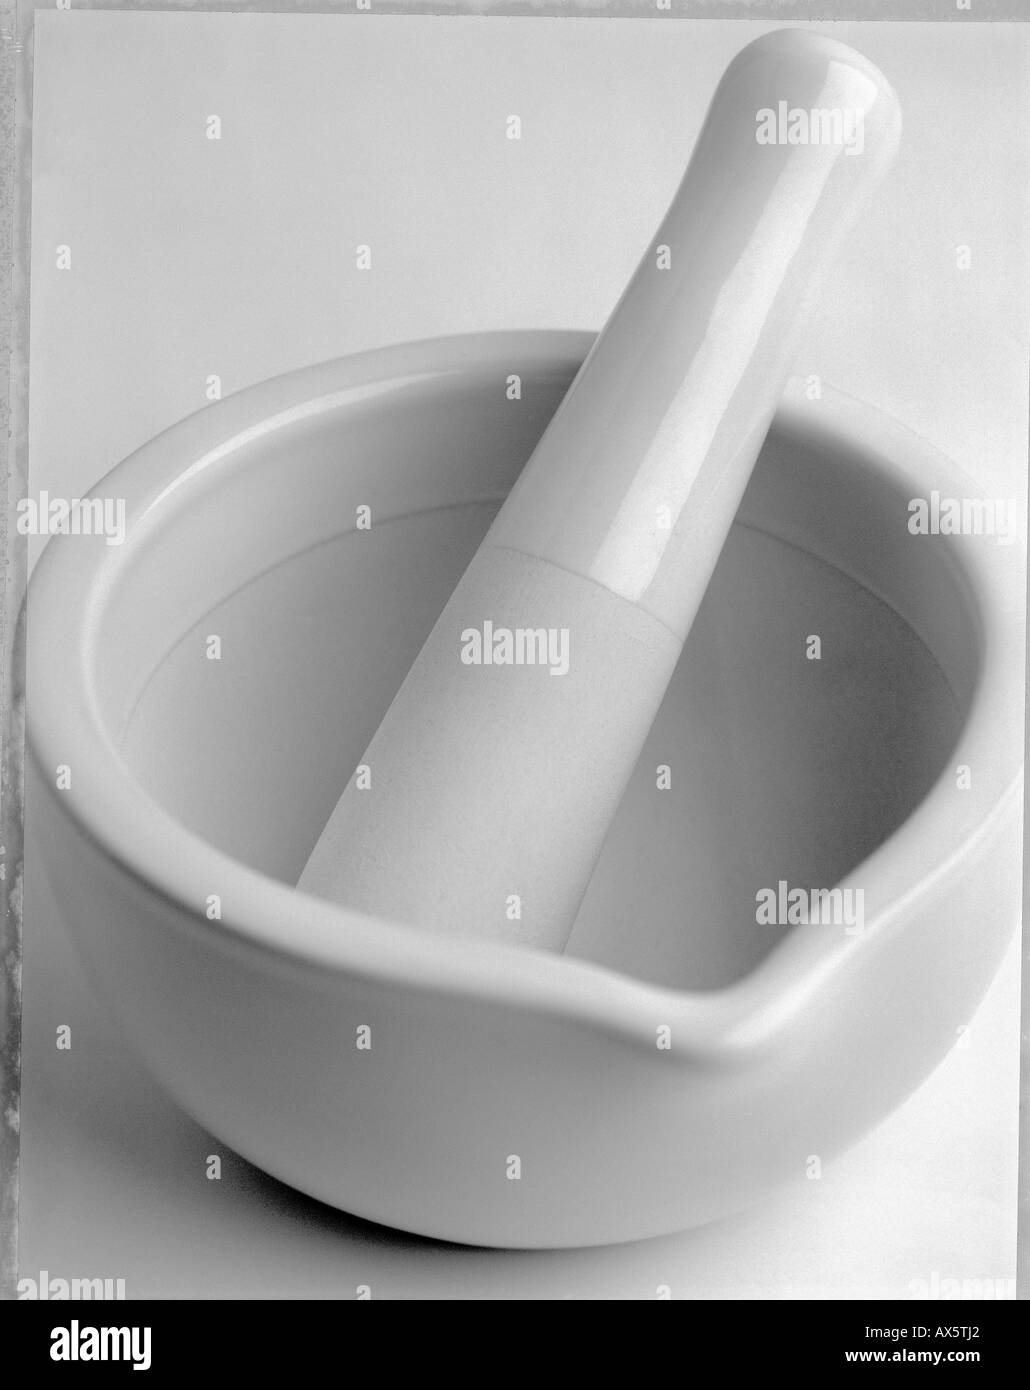 pestle and mortar close up black and white Stock Photo